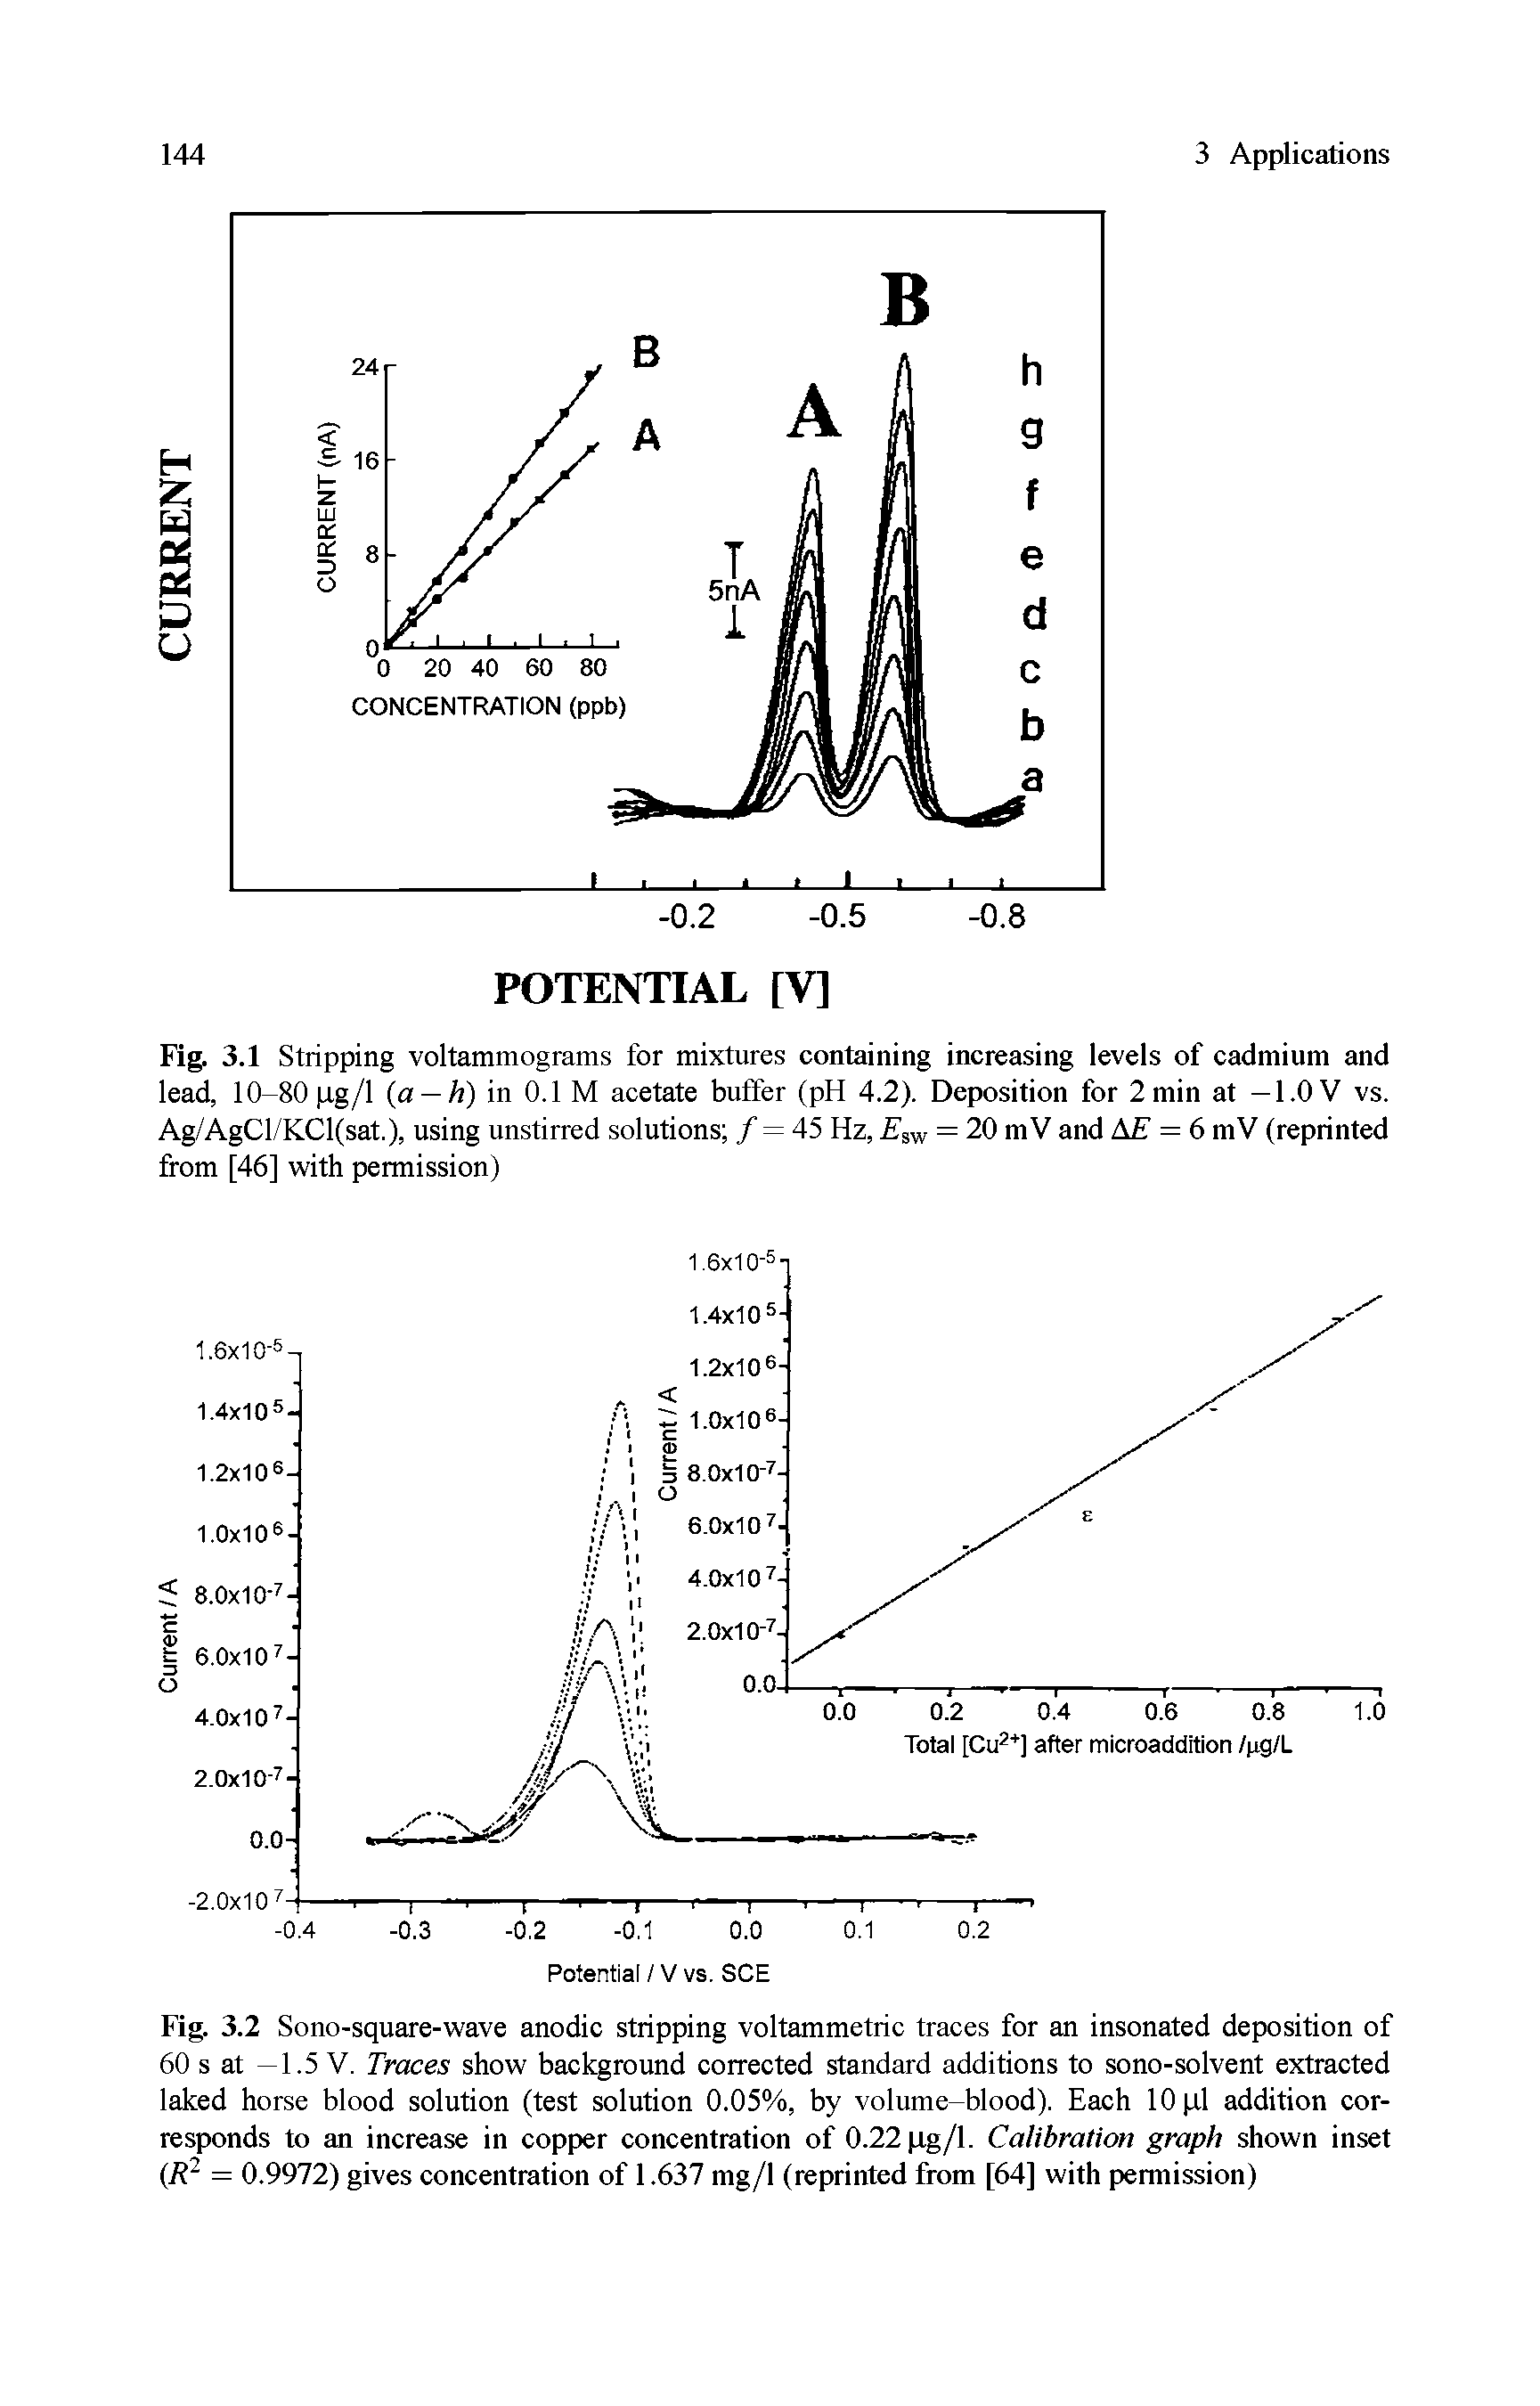 Fig. 3.2 Sono-square-wave anodic stripping voltammetric traces for an insonated deposition of 60 s at —1.5 V. Traces show background corrected standard additions to sono-solvent extracted laked horse blood solution (test solution 0.05%, by volume-blood). Each 10 (tl addition corresponds to an increase in copper concentration of 0.22 pg/1. Calibration graph shown inset (R = 0.9972) gives concentration of 1.637 mg/1 (reprinted from [64] with permission)...